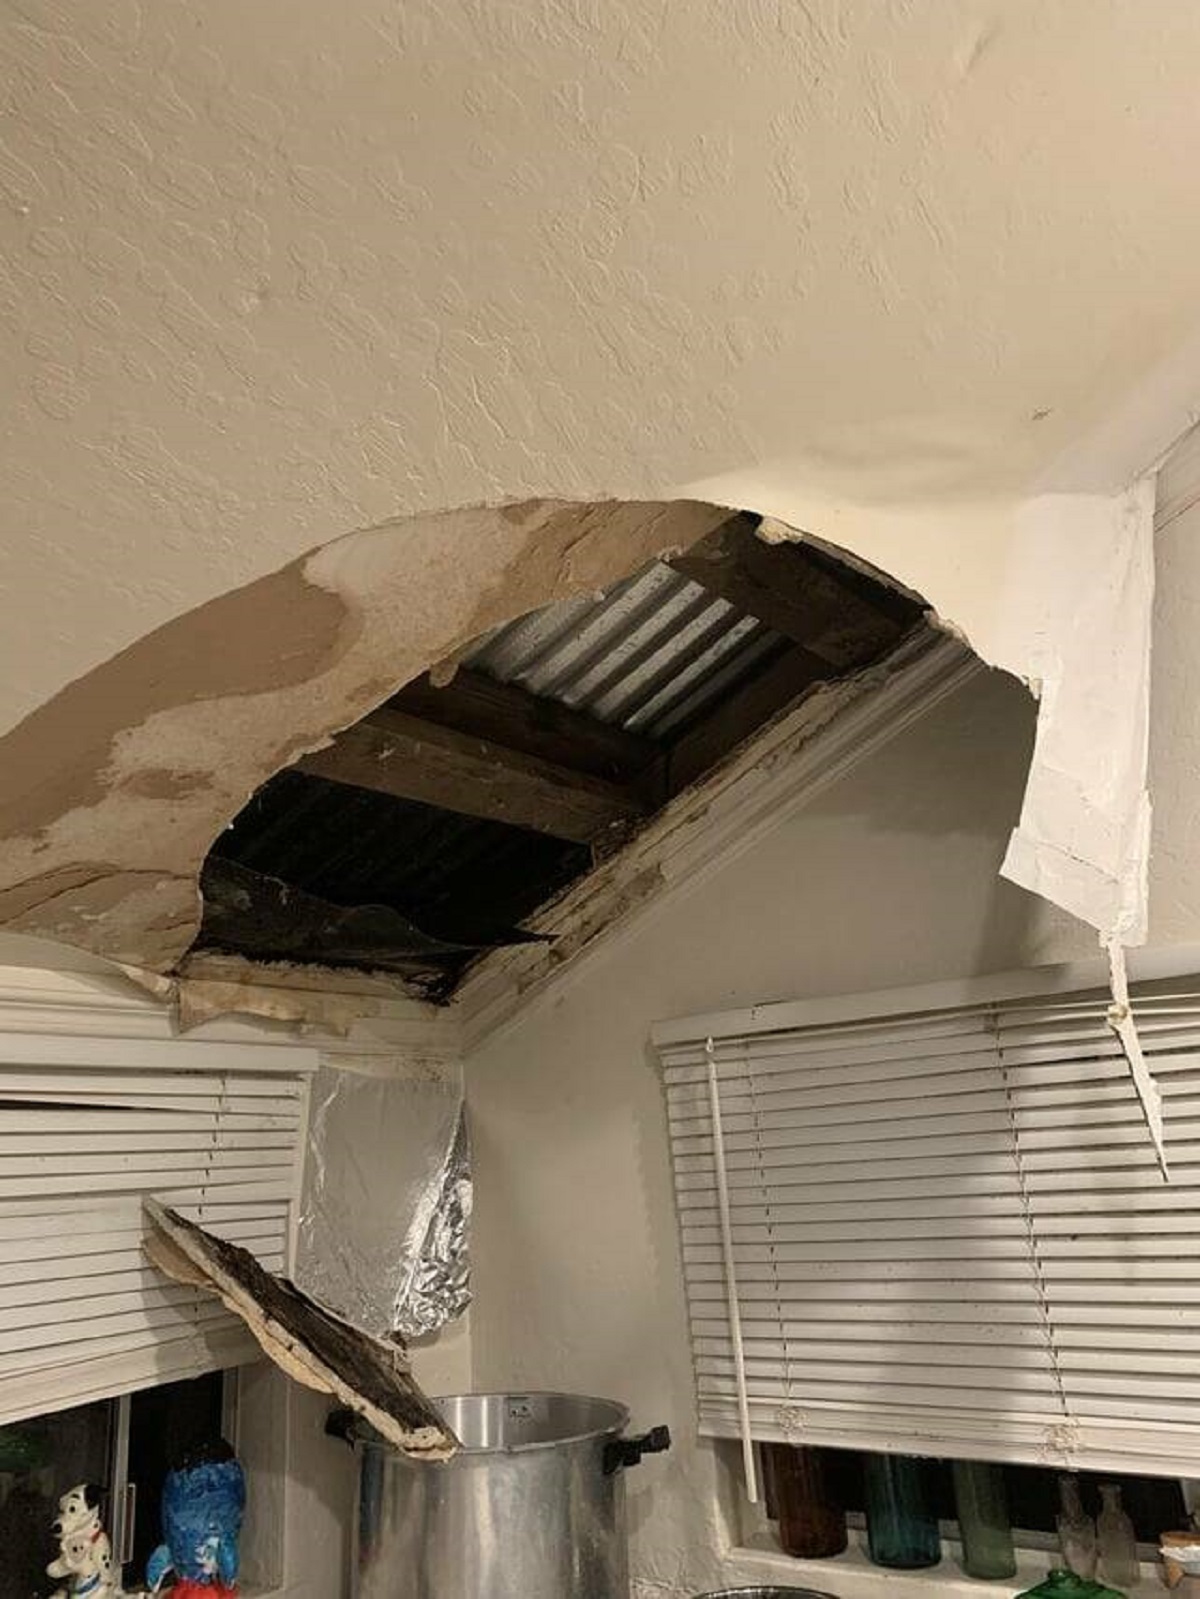 "When you try warning your landlords about the leak in your kitchen"